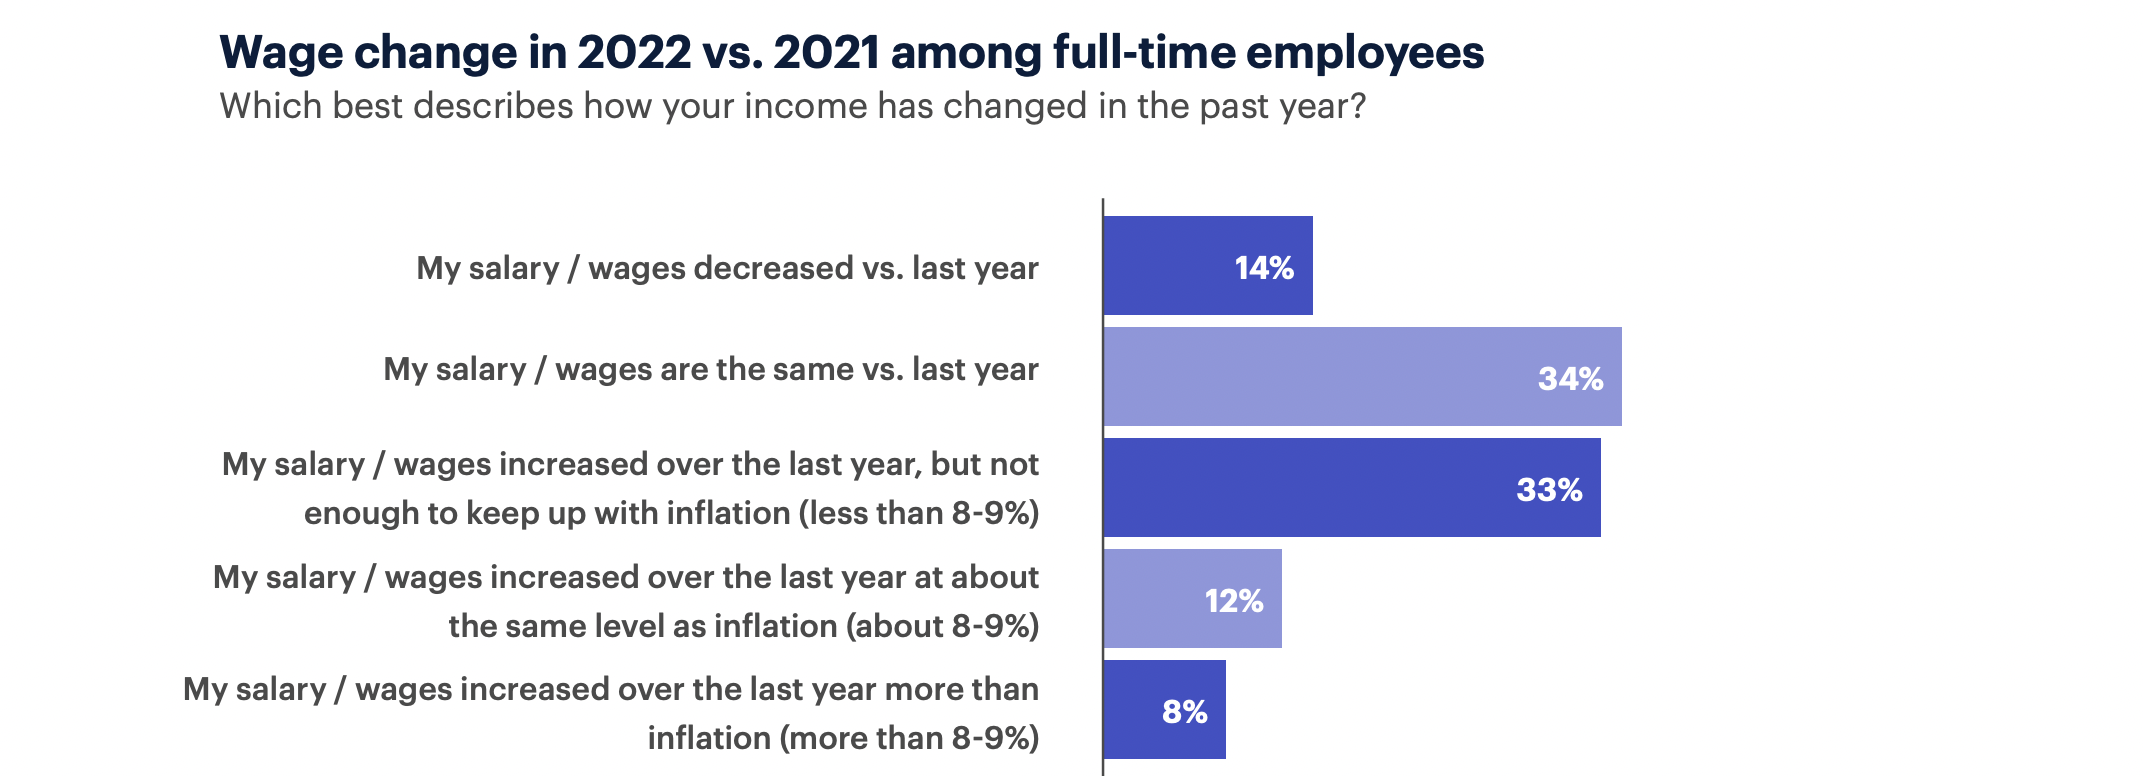 Wage change in 2022 vs 2021 among full-time employees; 34% report their salary/wages are the same vs last year.